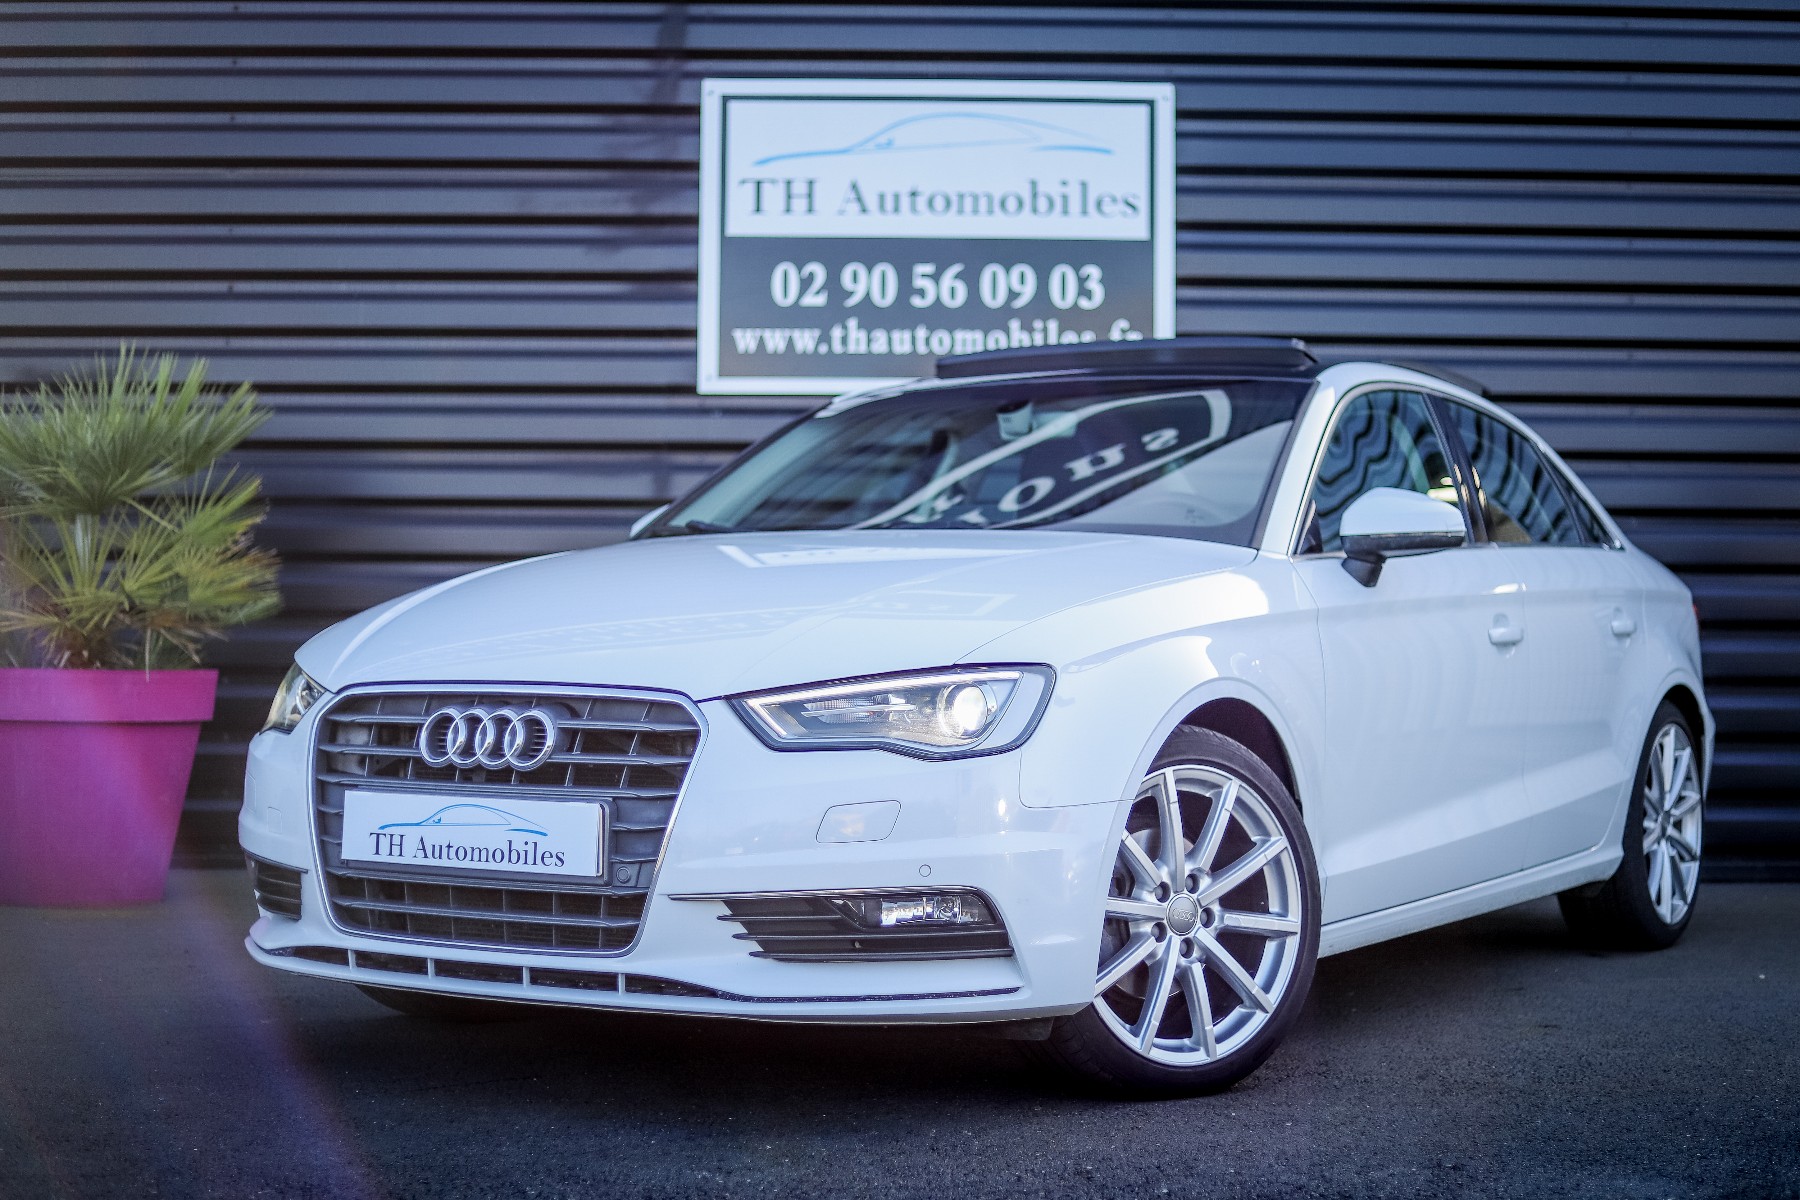 AUDI A3 BERLINE 2.0 TDI 150ch AMBITION LUXE S-TRONICAUDI A3 BERLINE 2.0 TDI 150ch AMBITION LUXE S-TRONIC